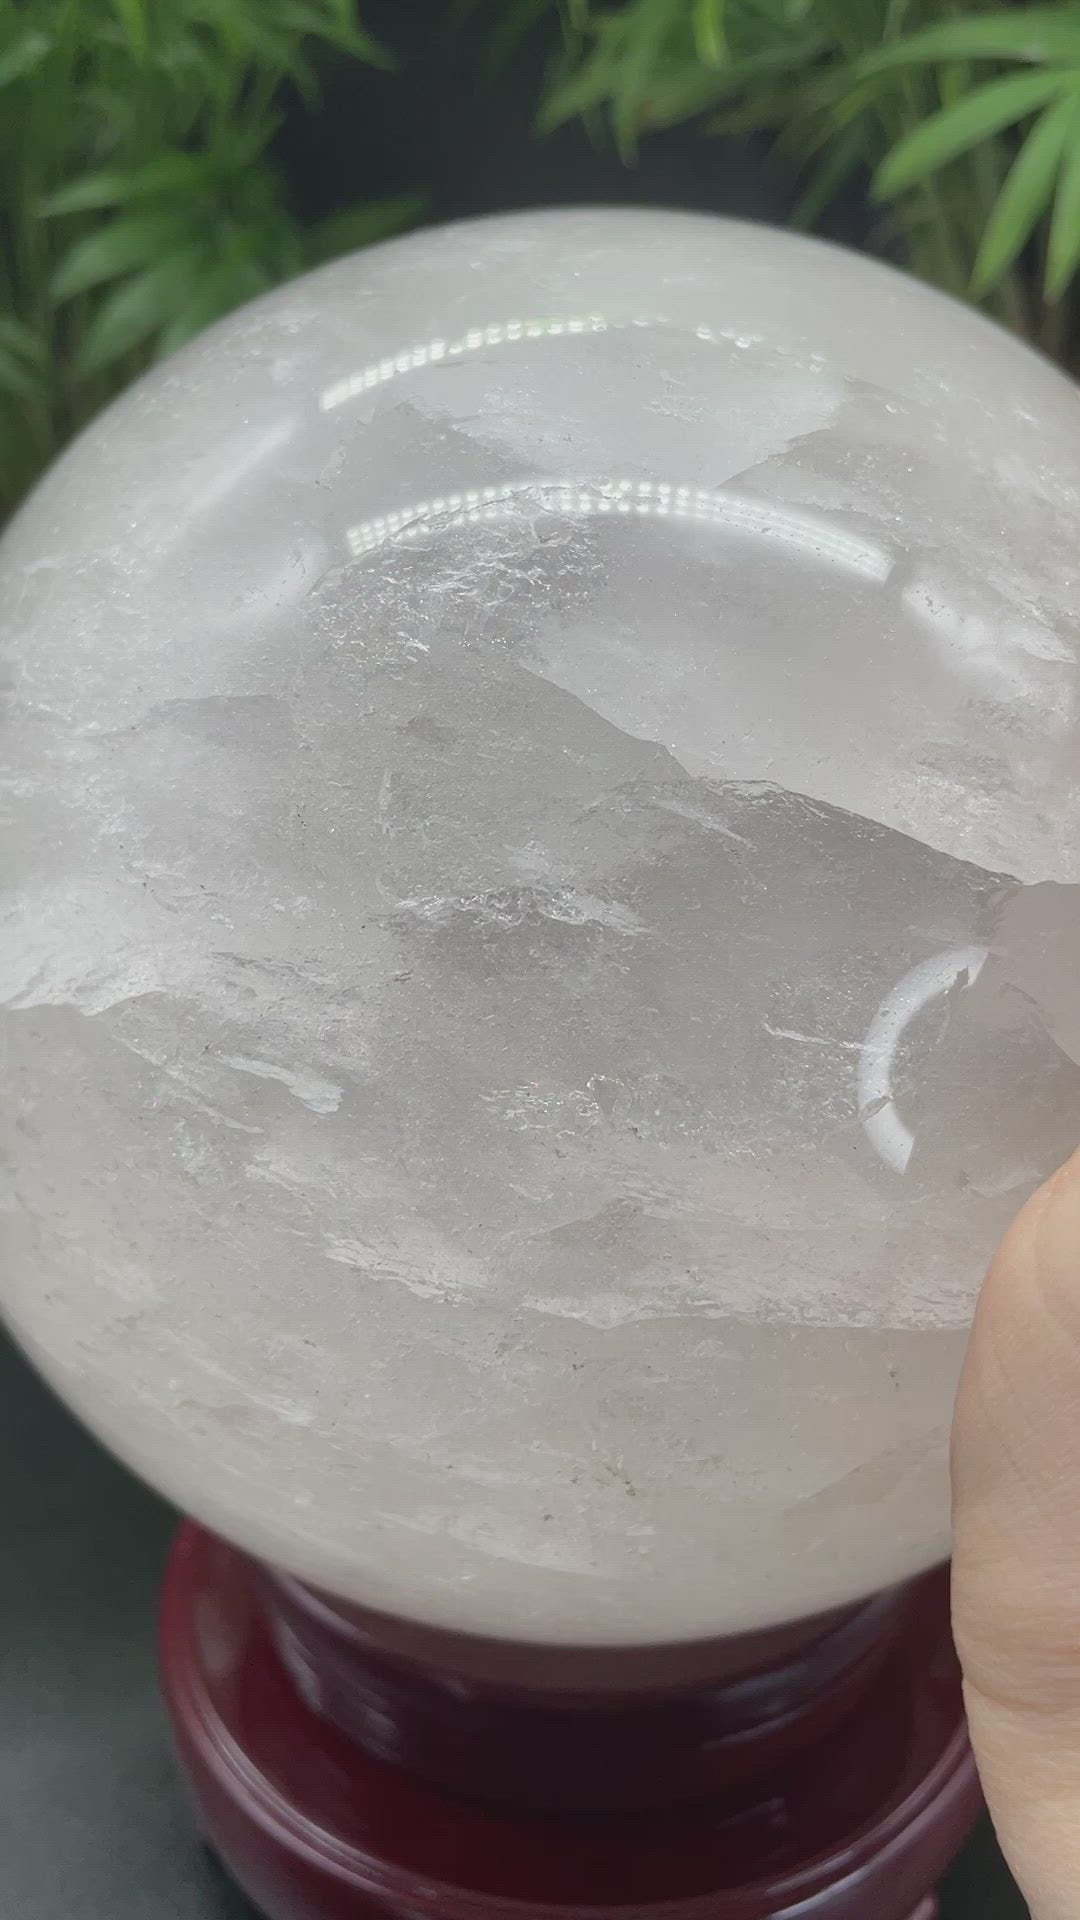 Pictured is a sphere carved out of clear quartz.